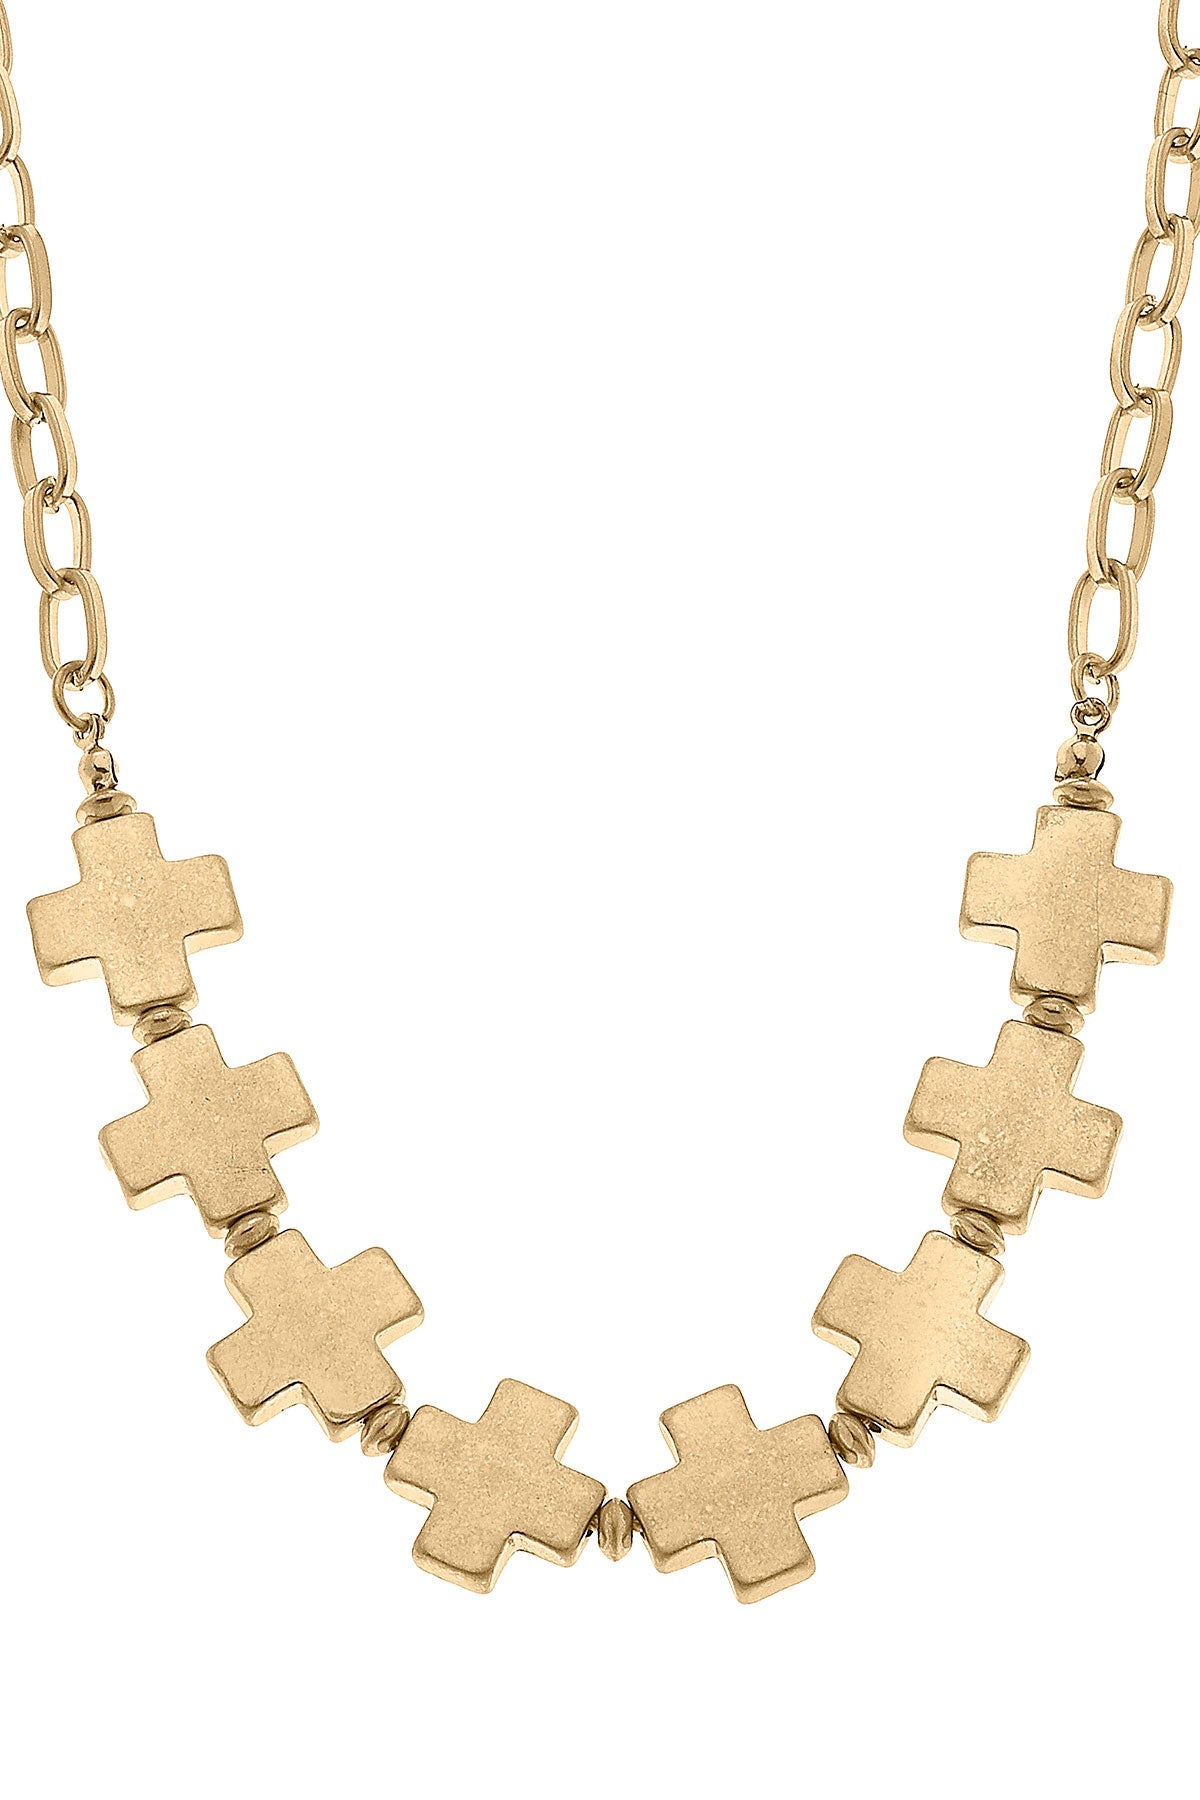 Edith Square Cross Chain Link Necklace in Worn Gold